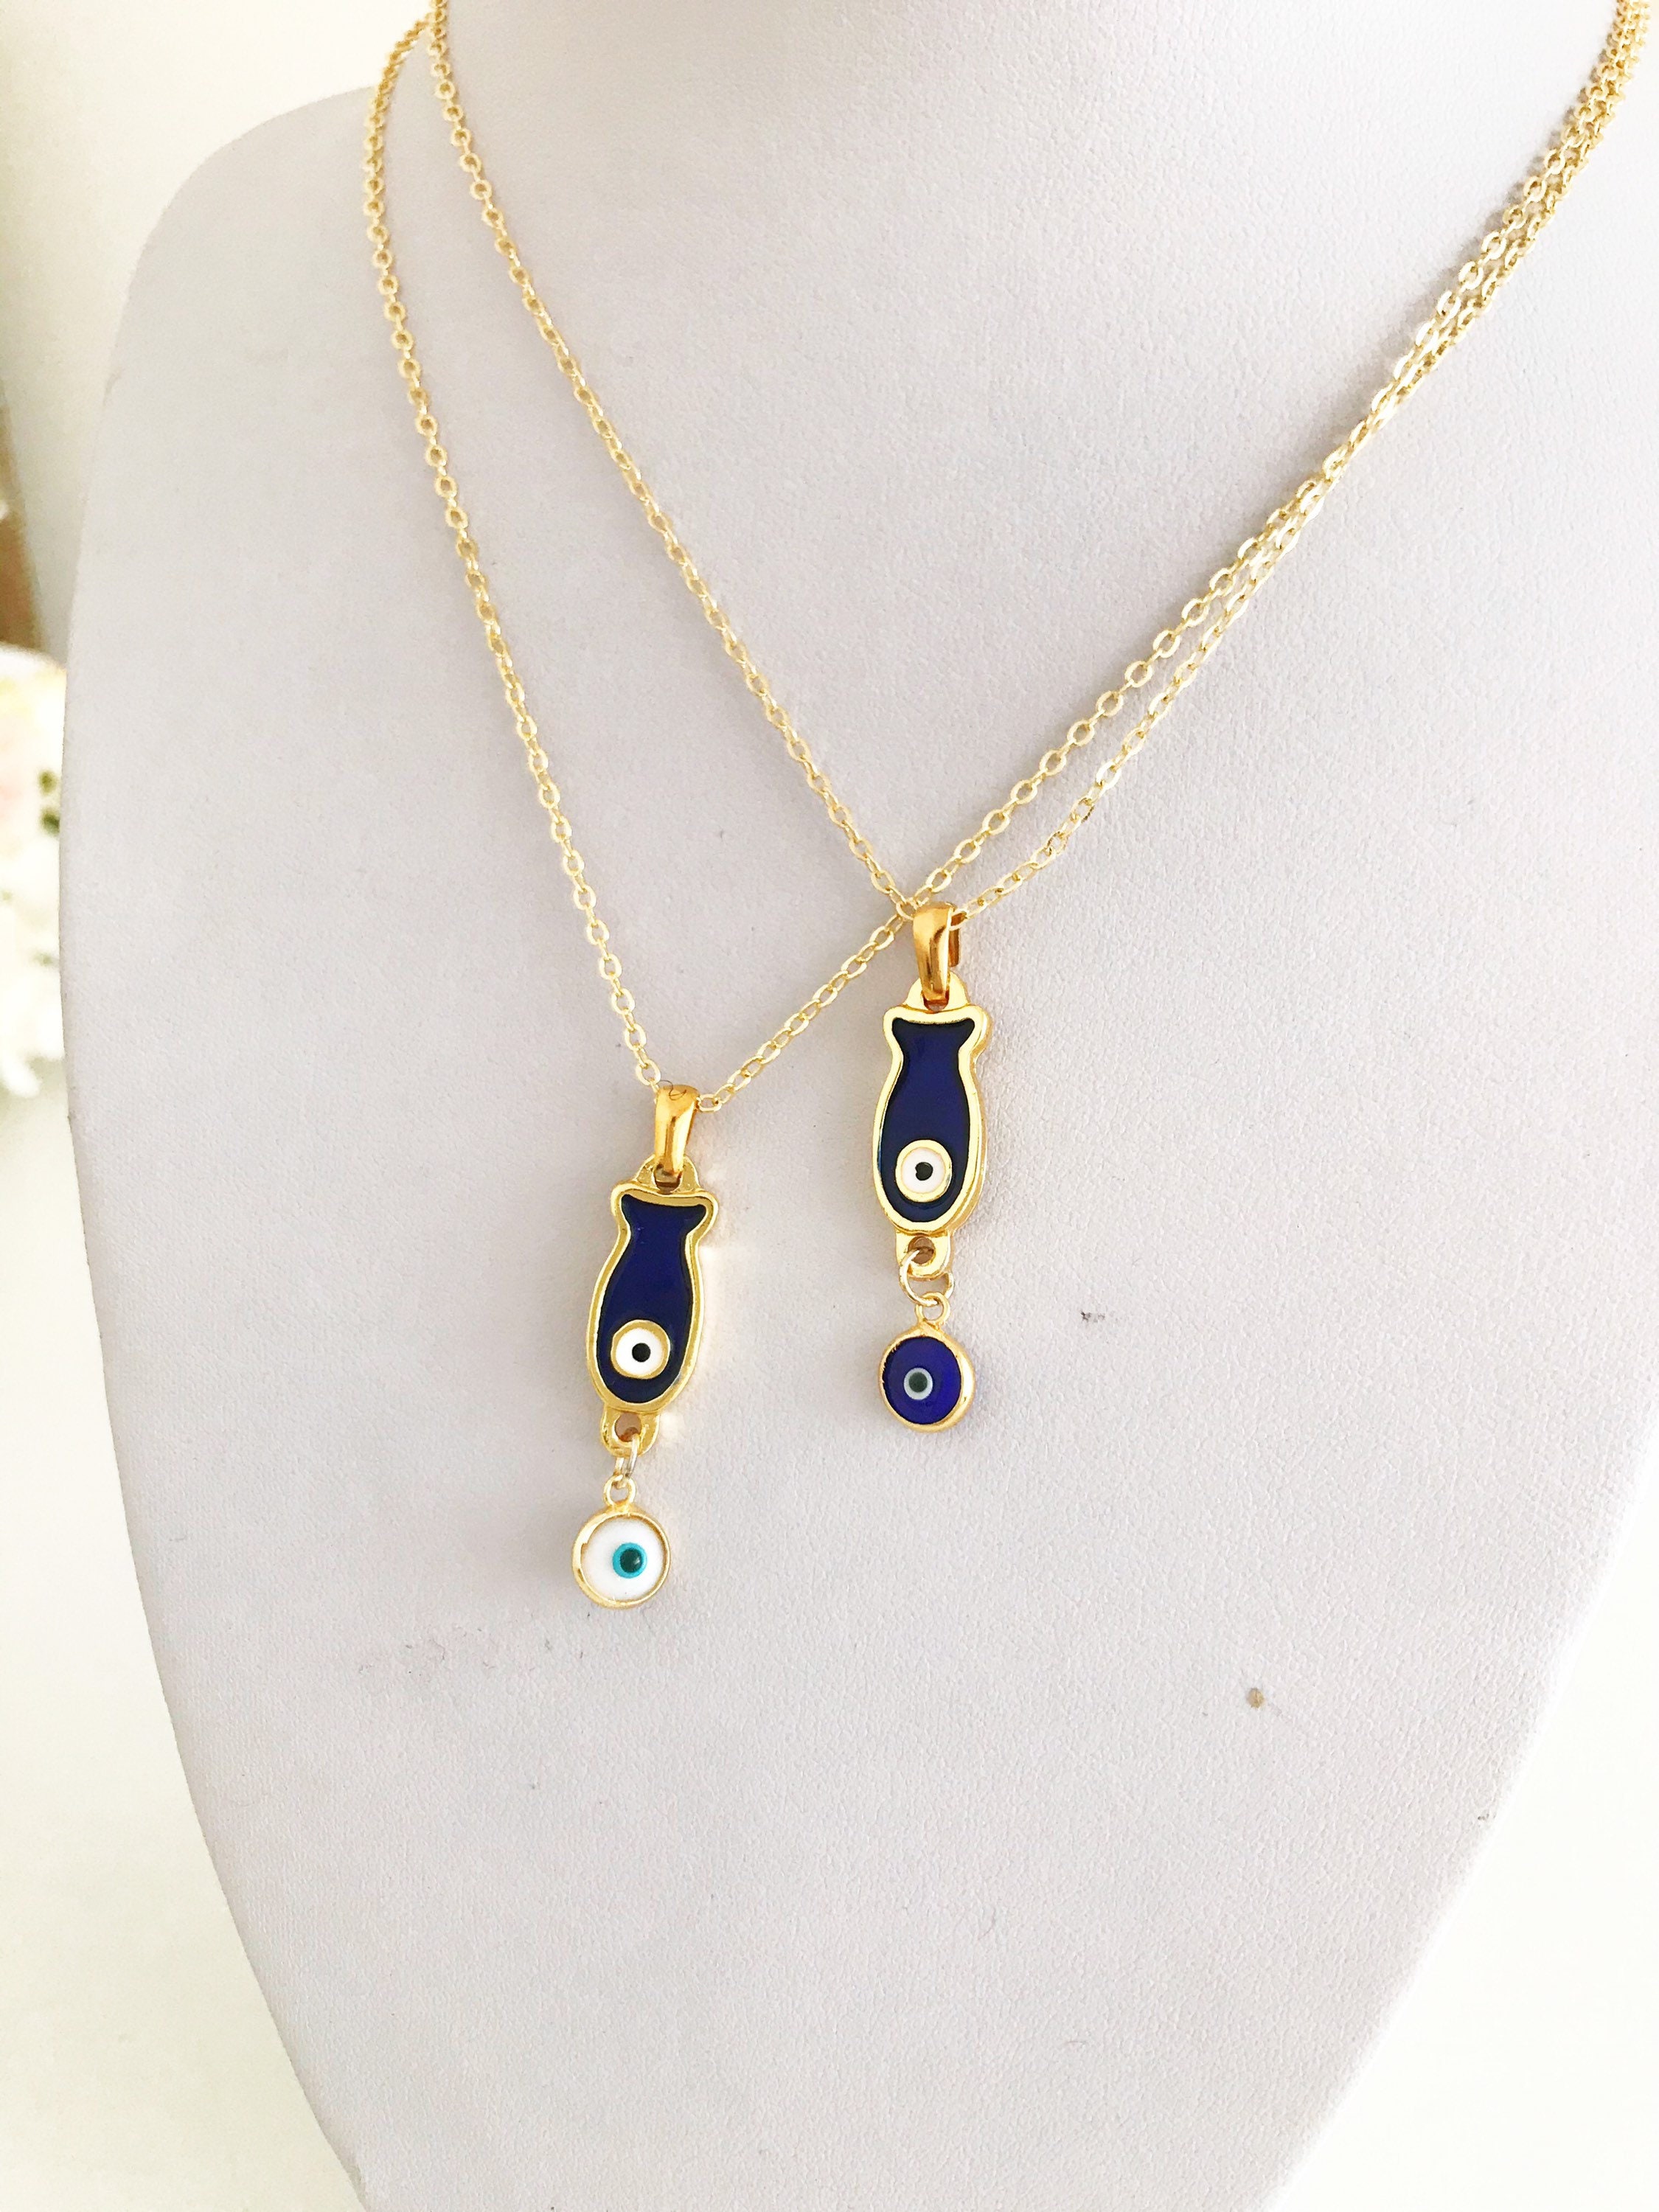 Blue fish charm necklace evil eye necklace good luck | Etsy